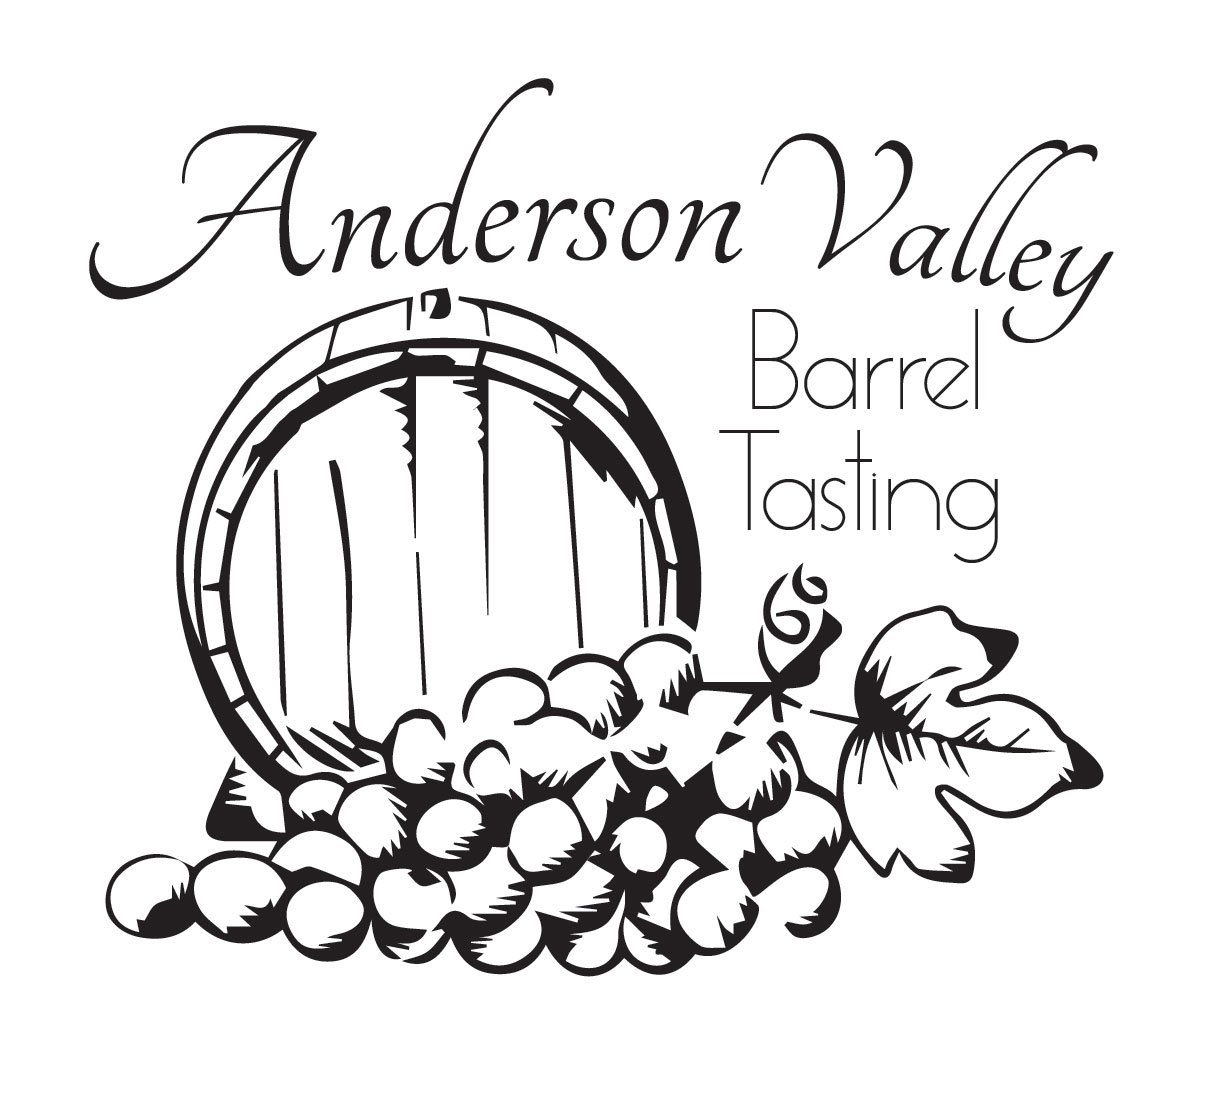 Foursight Wines Inc.: First-Ever Anderson Valley Barrel Tasting 